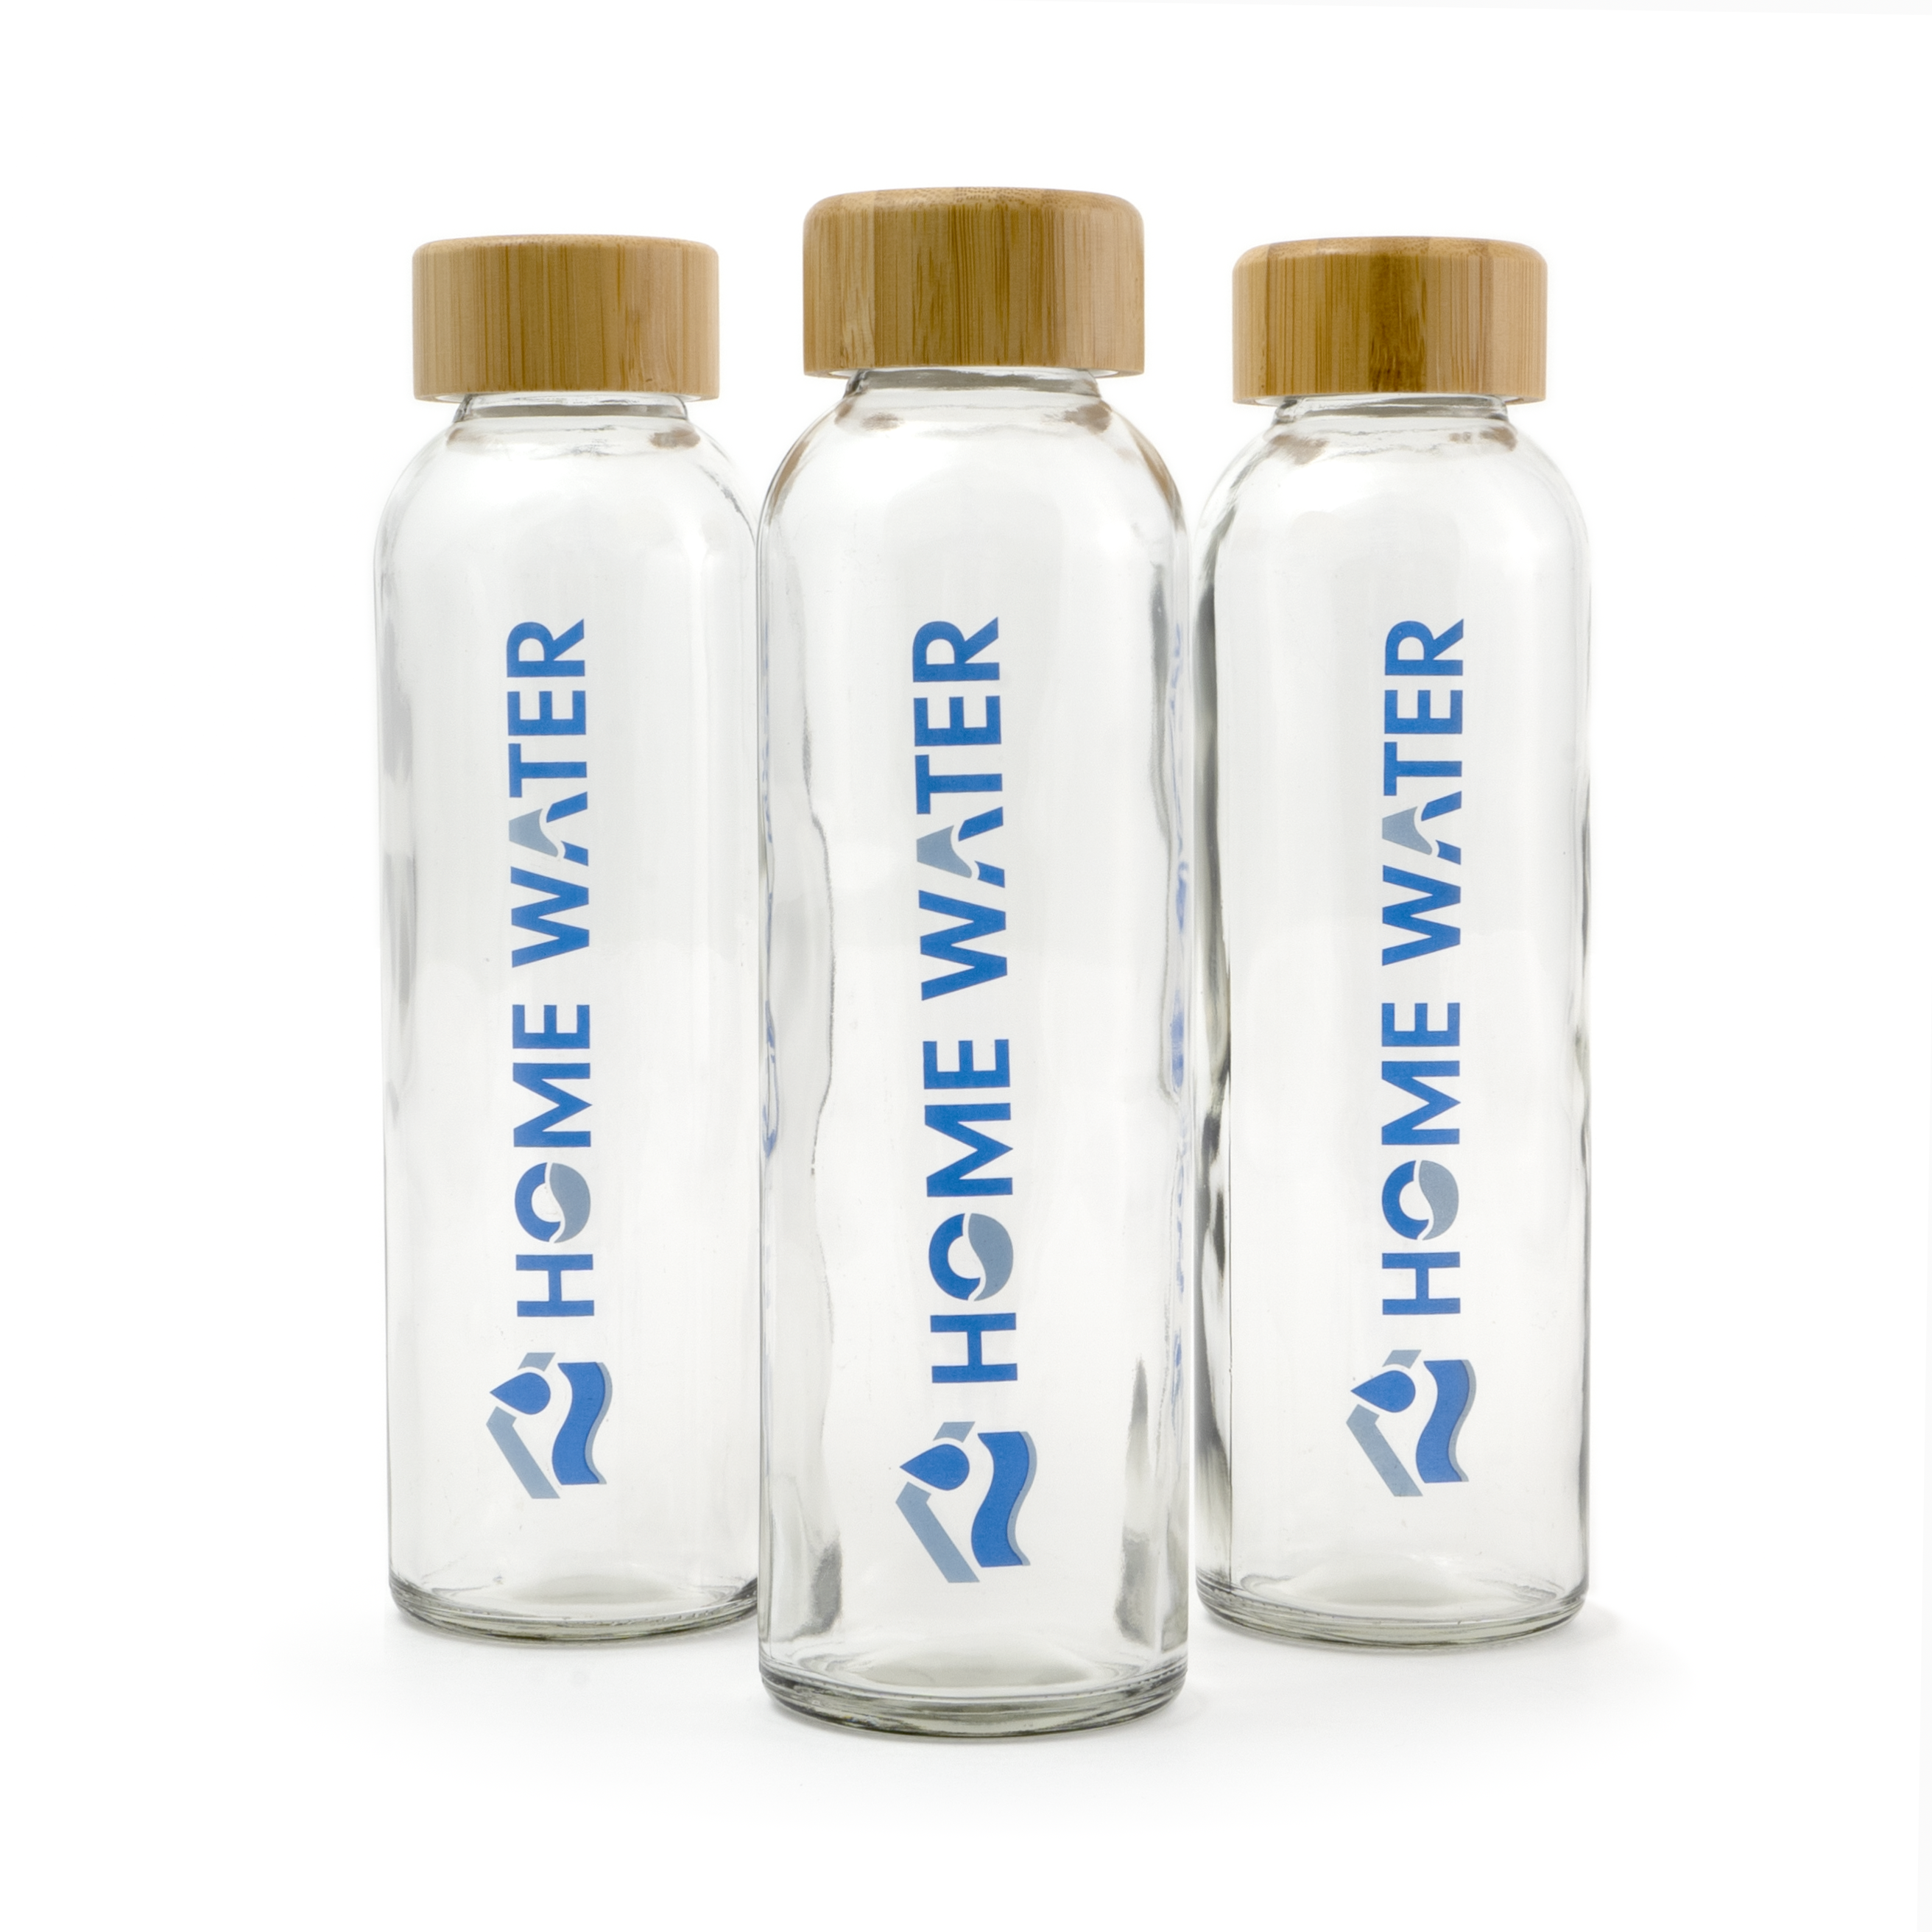 HomeWater Glass Bottle Pack (Set of 4)